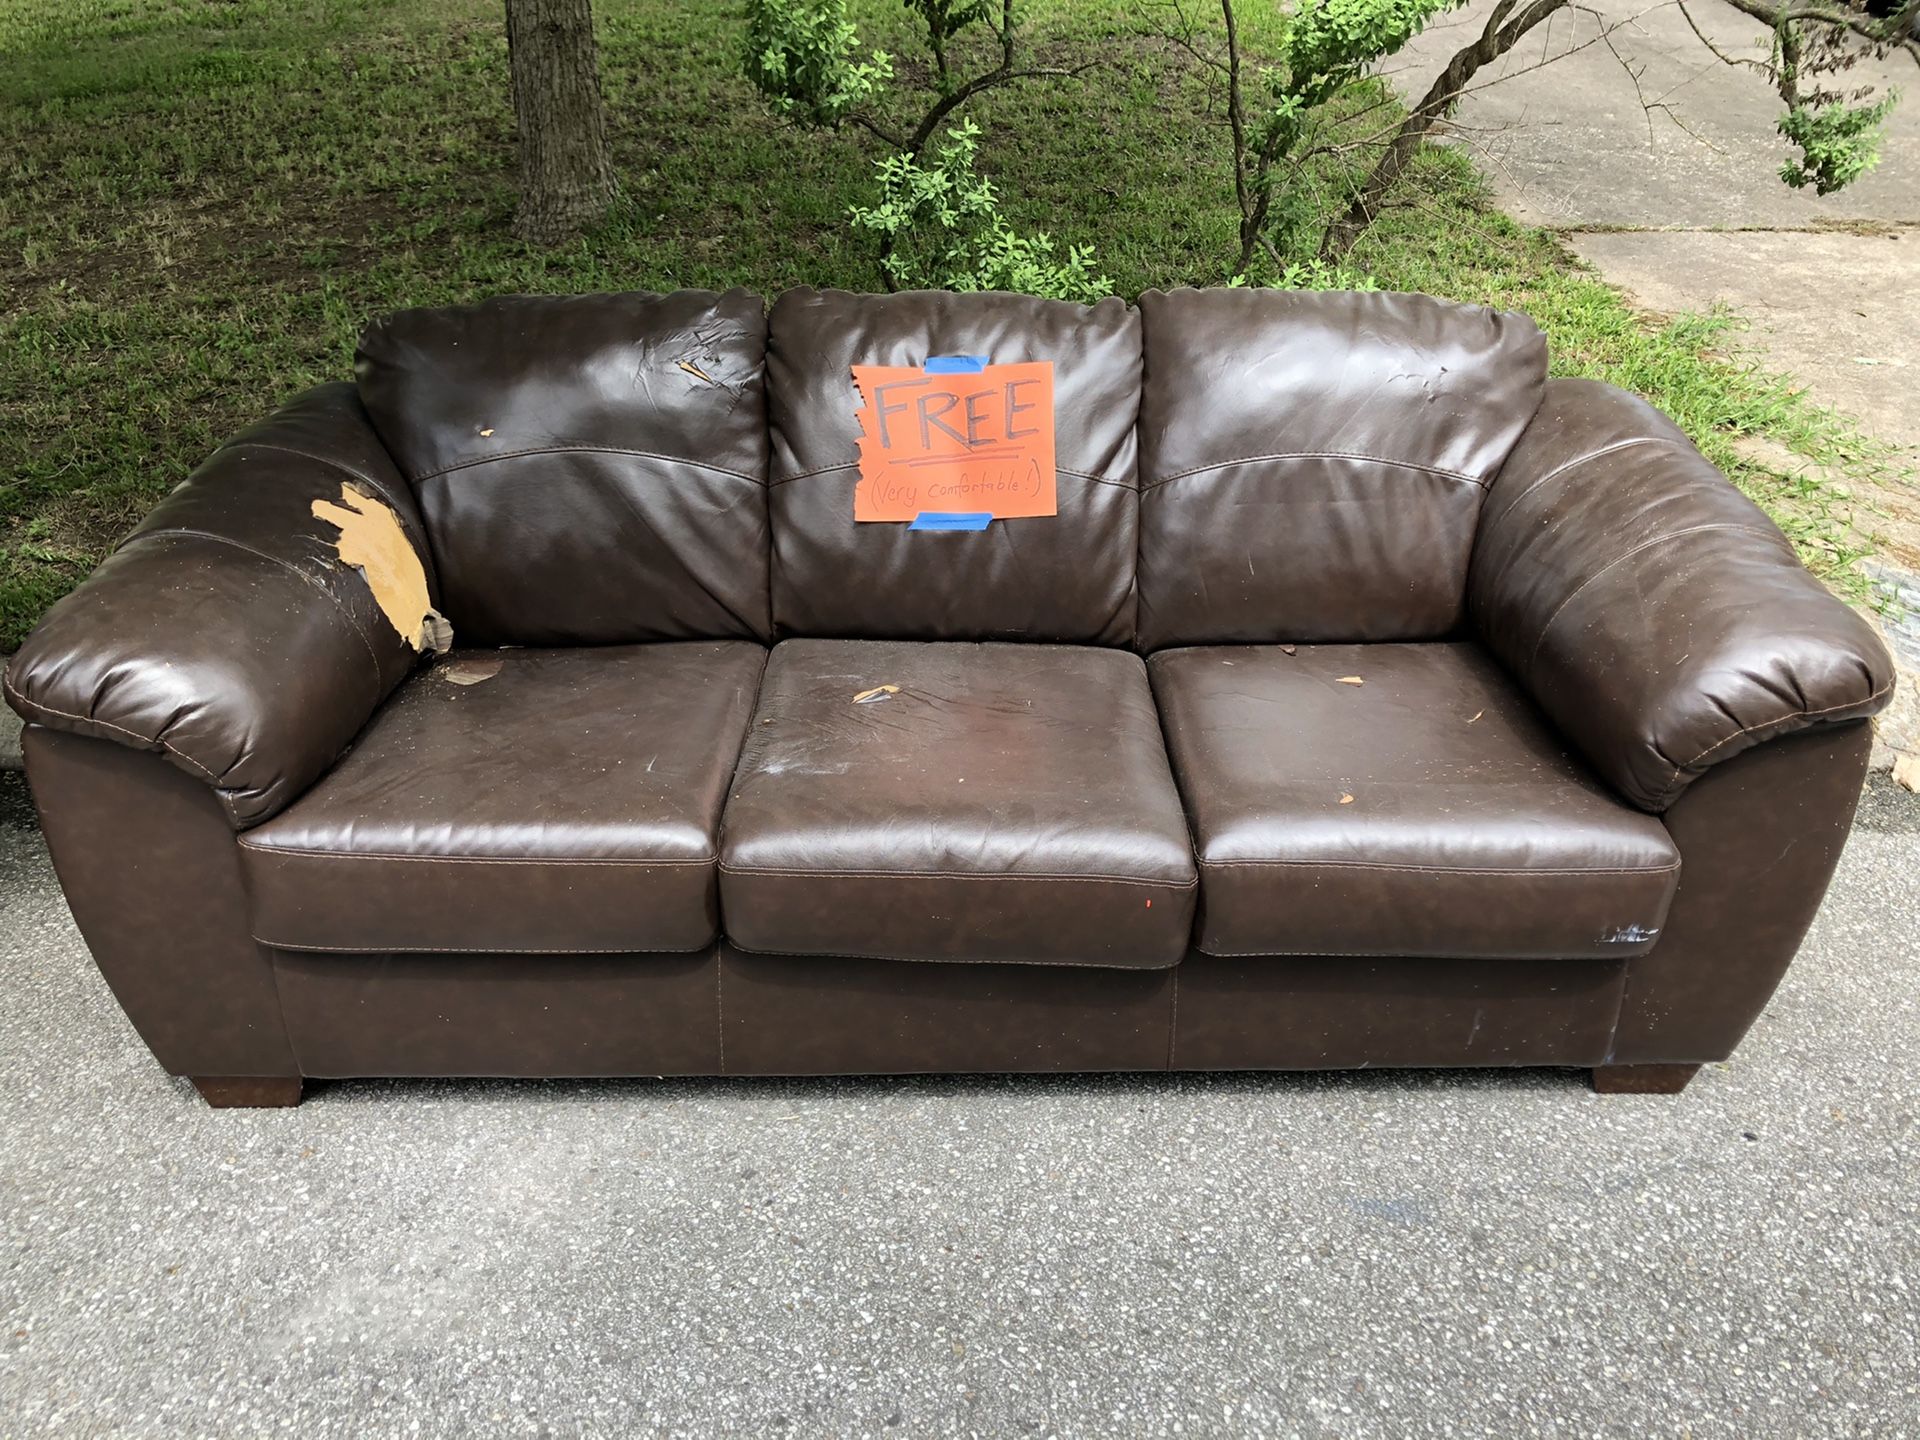 FREE Cozy Couch